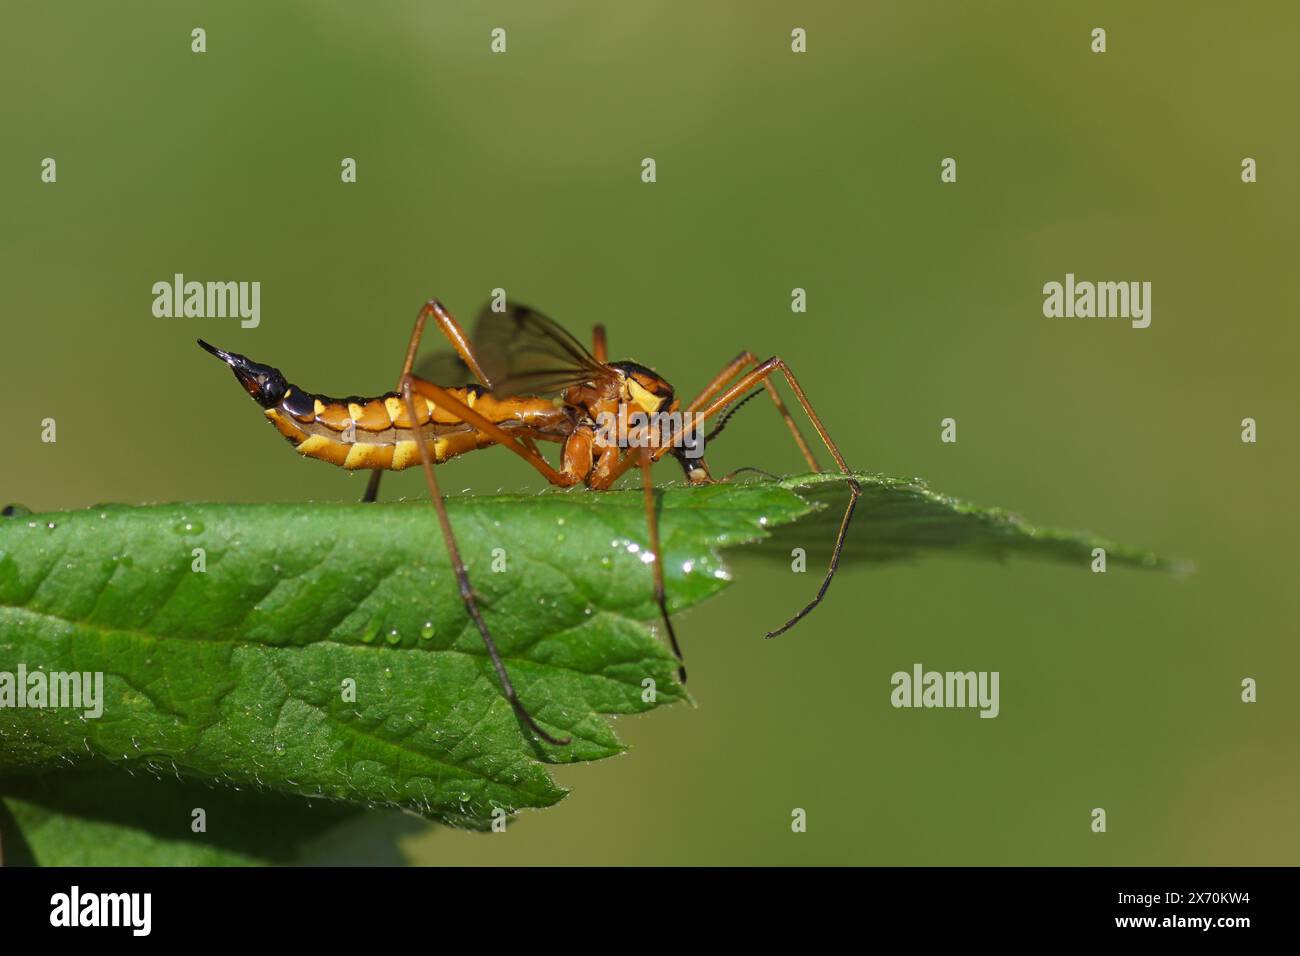 Close up Female crane fly Ctenophora pectinicornis, family Tipulidae on a leaf. Dutch Garden, Spring, May Stock Photo